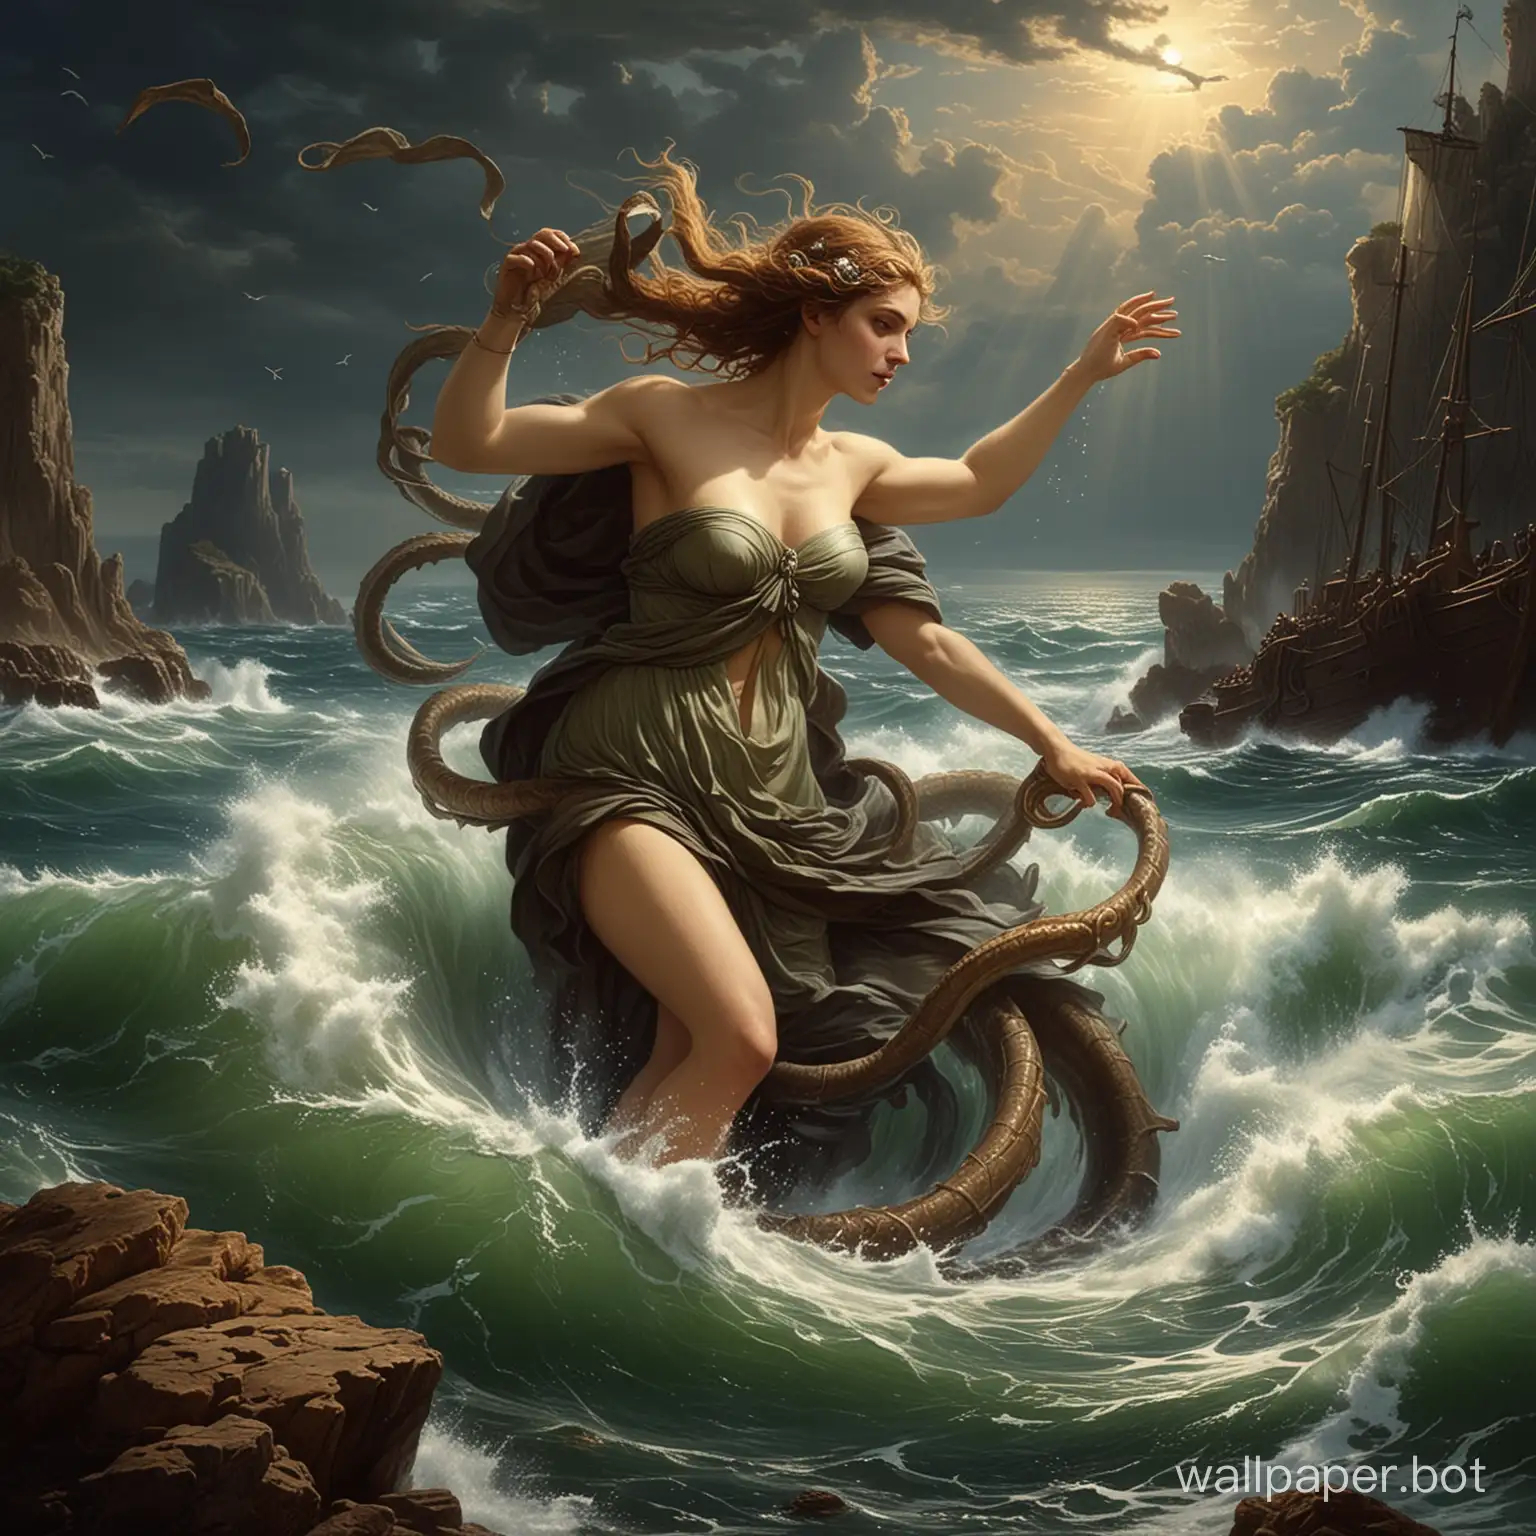 Charybdis — in ancient Greek mythology, a sea monster that lives on one of two islands off the coast of Sicily (according to another version, in the strait between Sicily and Italy). Usually, this name implies a giant who three times a day swallows cows and then vomits them back out. Sometimes it is depicted as a woman who either sinks ships or kidnaps people to later eat them. According to another version, Charybdis is a woman transformed into a monster by the goddess Hera for helping Zeus hide from his wife. In Homer's 'Odyssey', Charybdis is described as:

'First you will see Charybdis: tirelessly she gnaws at the rocks
Three times a day swallowing
Her food and three times vomiting it back out'.

Charybdis is also mentioned in Virgil's poem 'Aeneid', where she is depicted as a fearsome whirlpool capable of swallowing a ship. It was believed that this character served as the prototype for Scylla — another mythical sea creature. On a black background